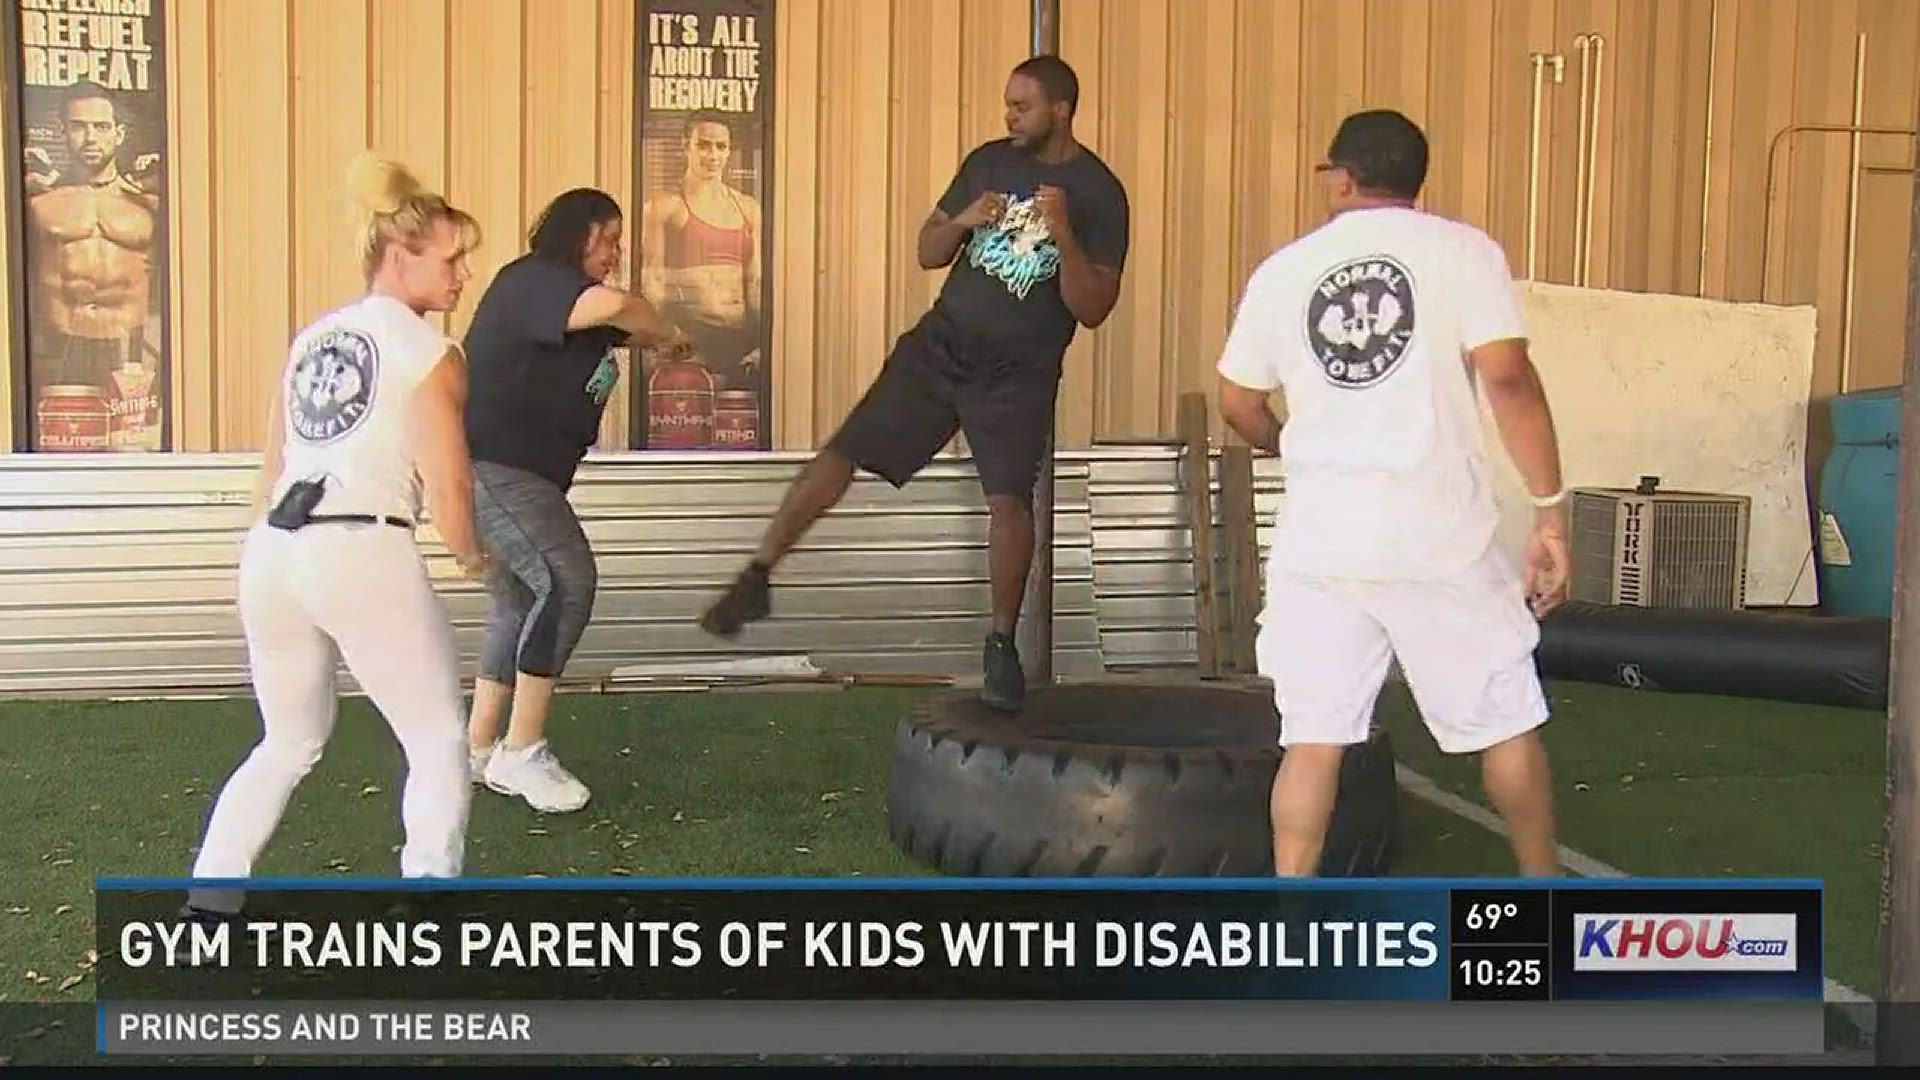 Former Ms. Olympia Tina Chandler is lifting spirits by working out parents of children with disabilities.